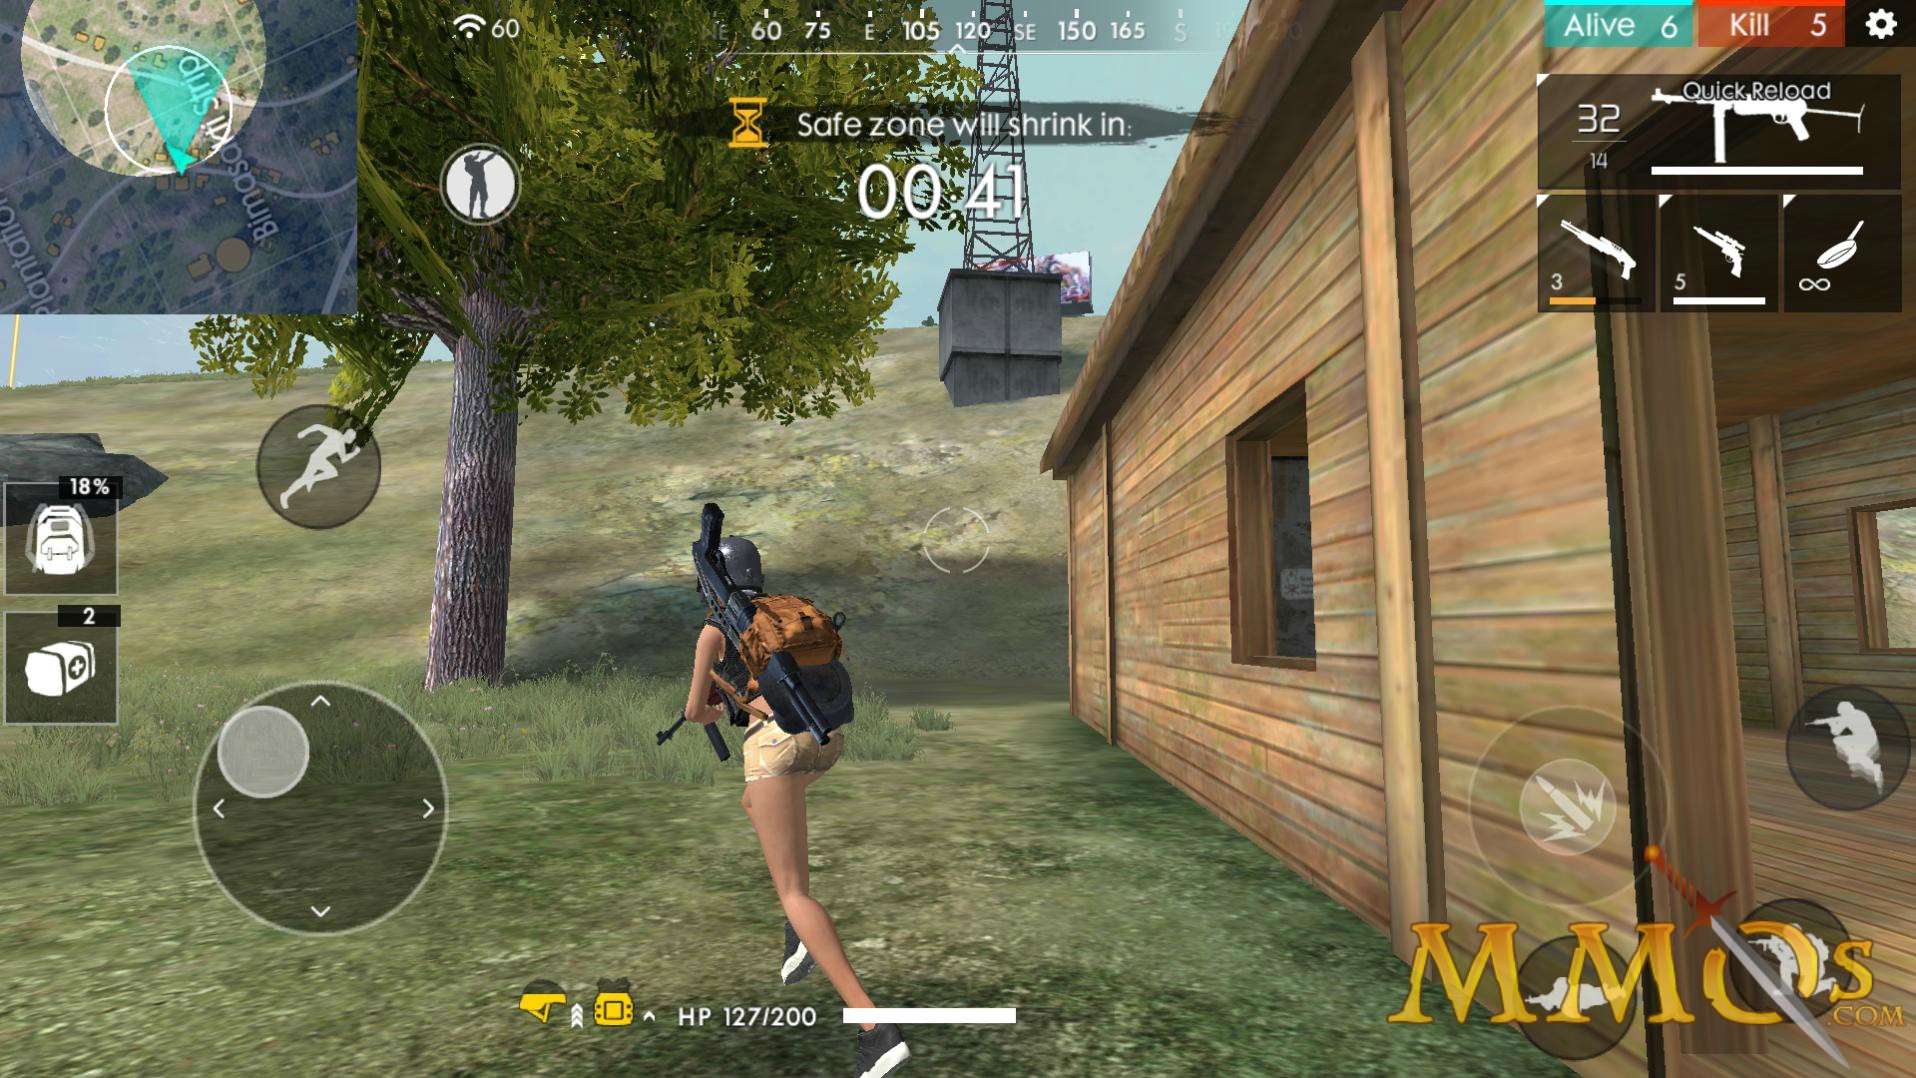 Garena Free Fire Gameplay, Free Fire Game Online